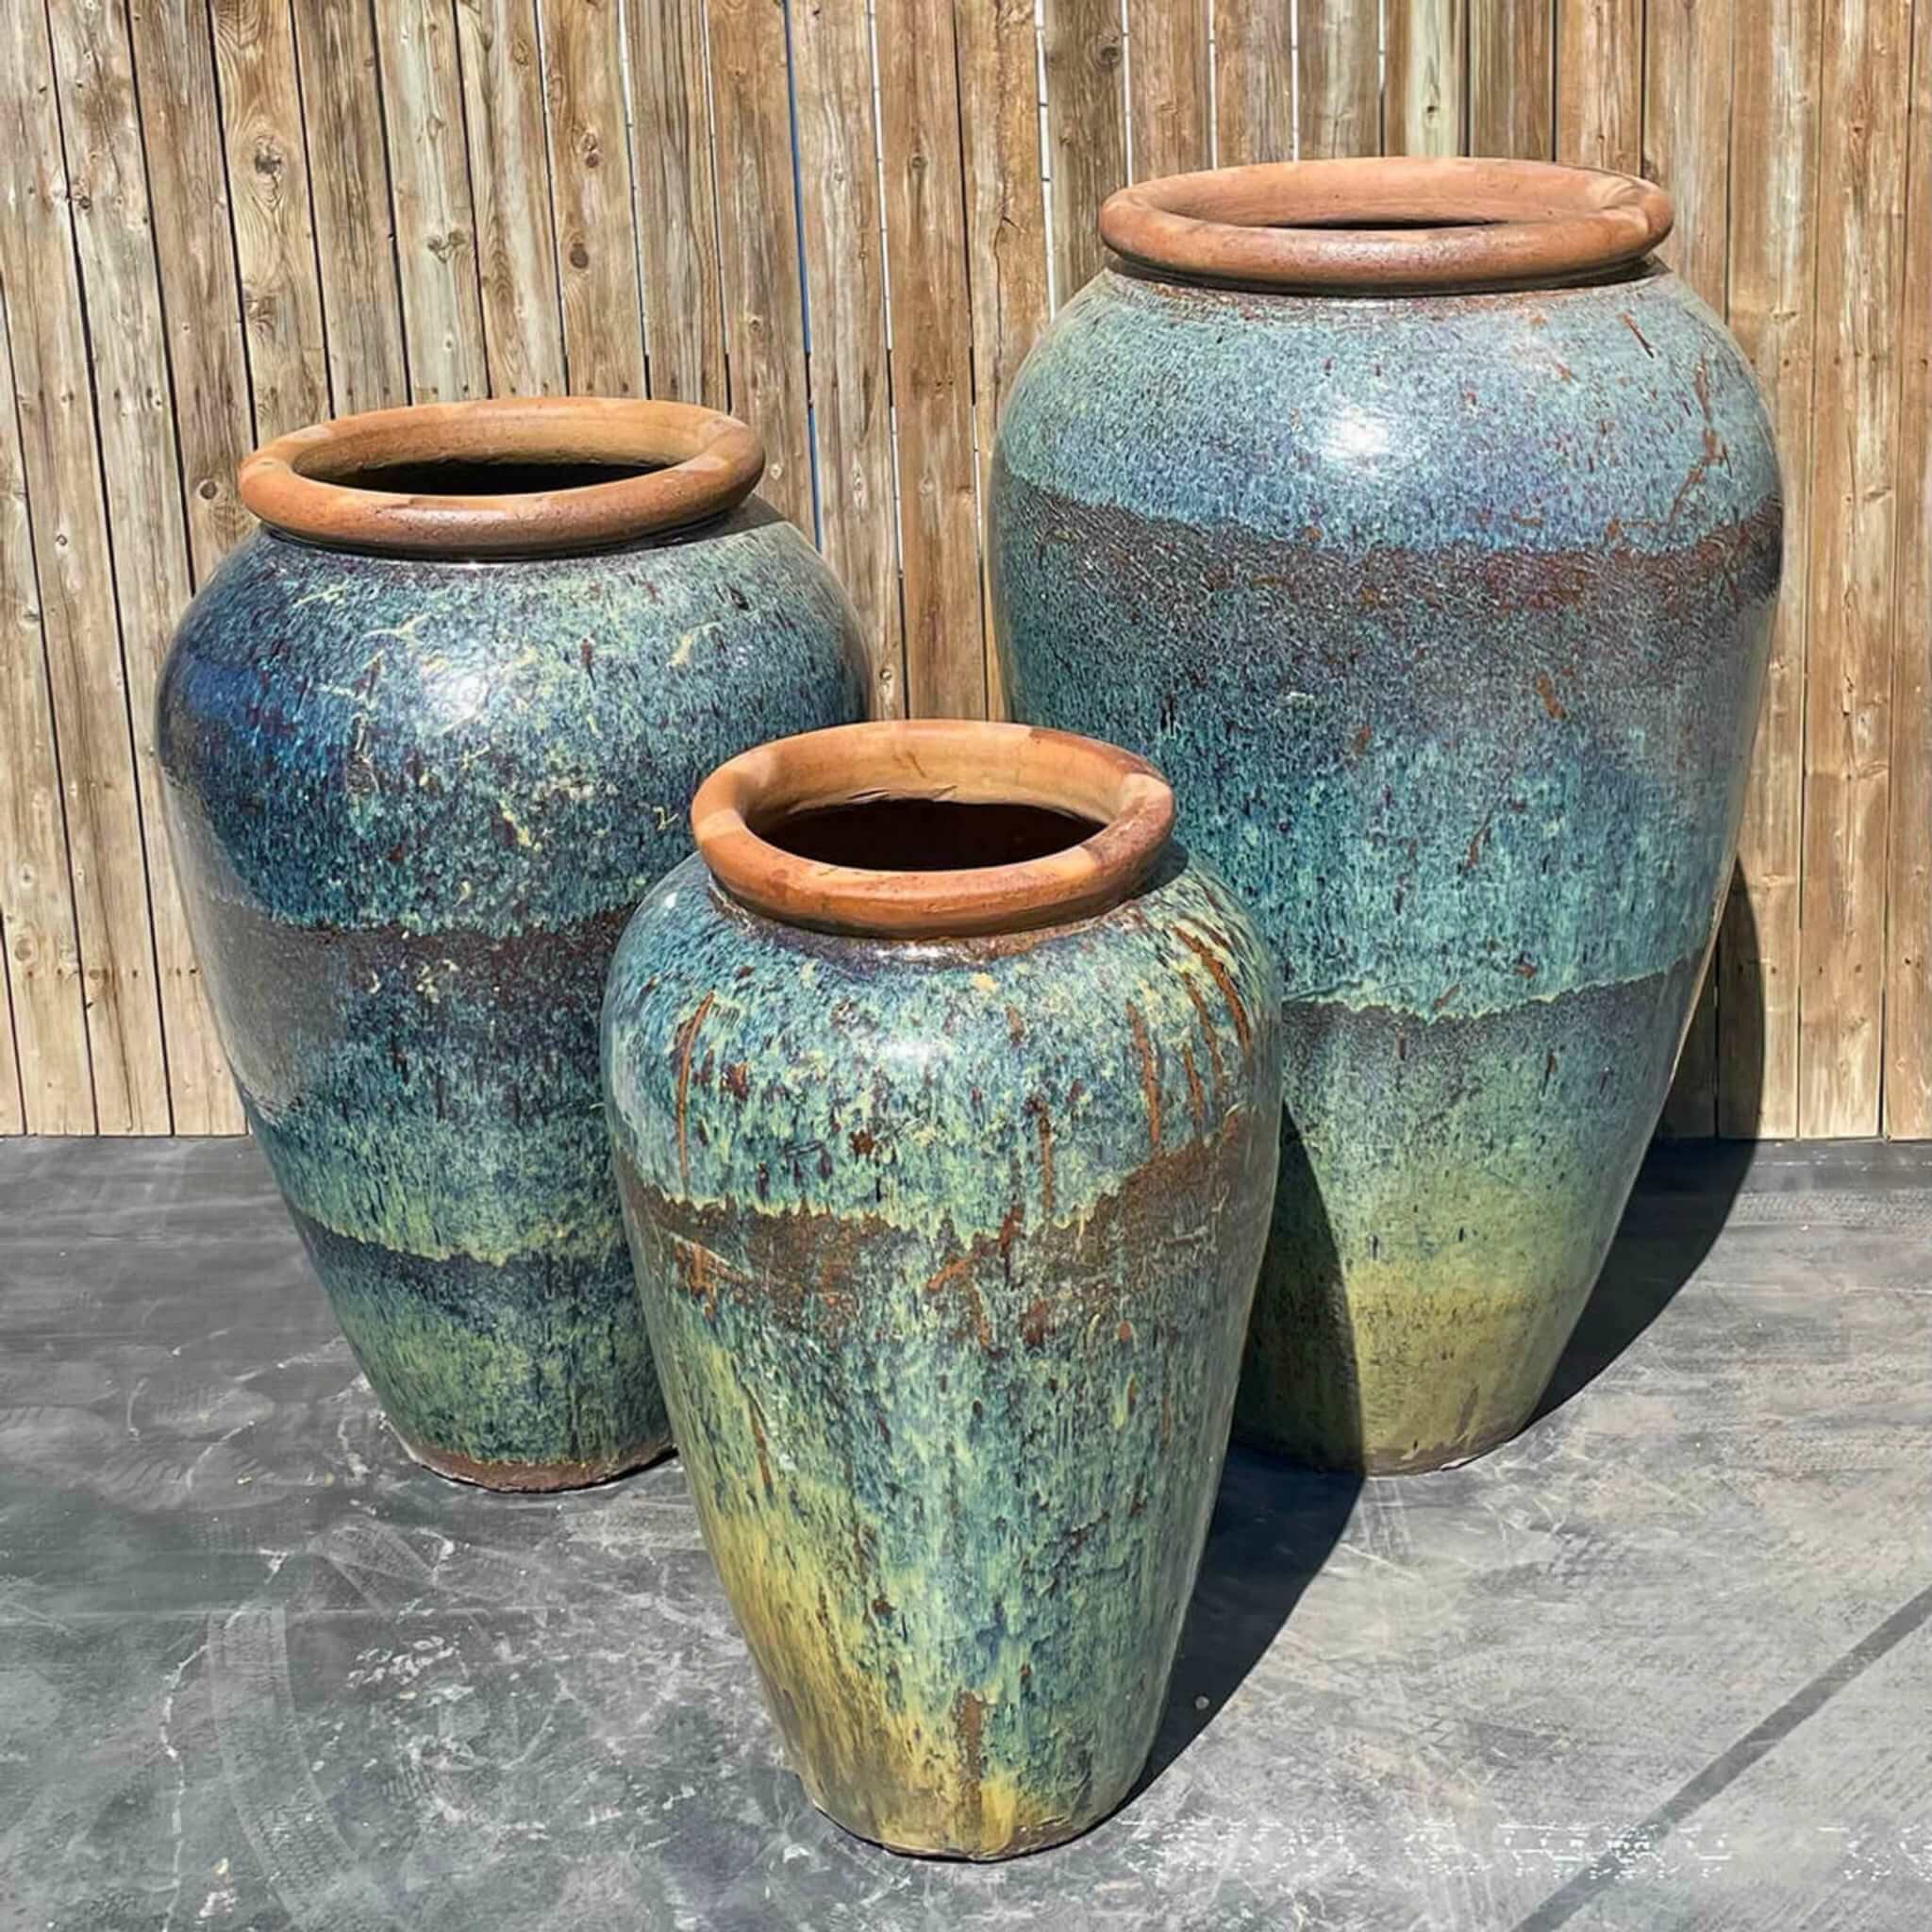  Triple Tuscany Vase "Blue/Green" Water Fountain - Complete Kit - Blue Thumb